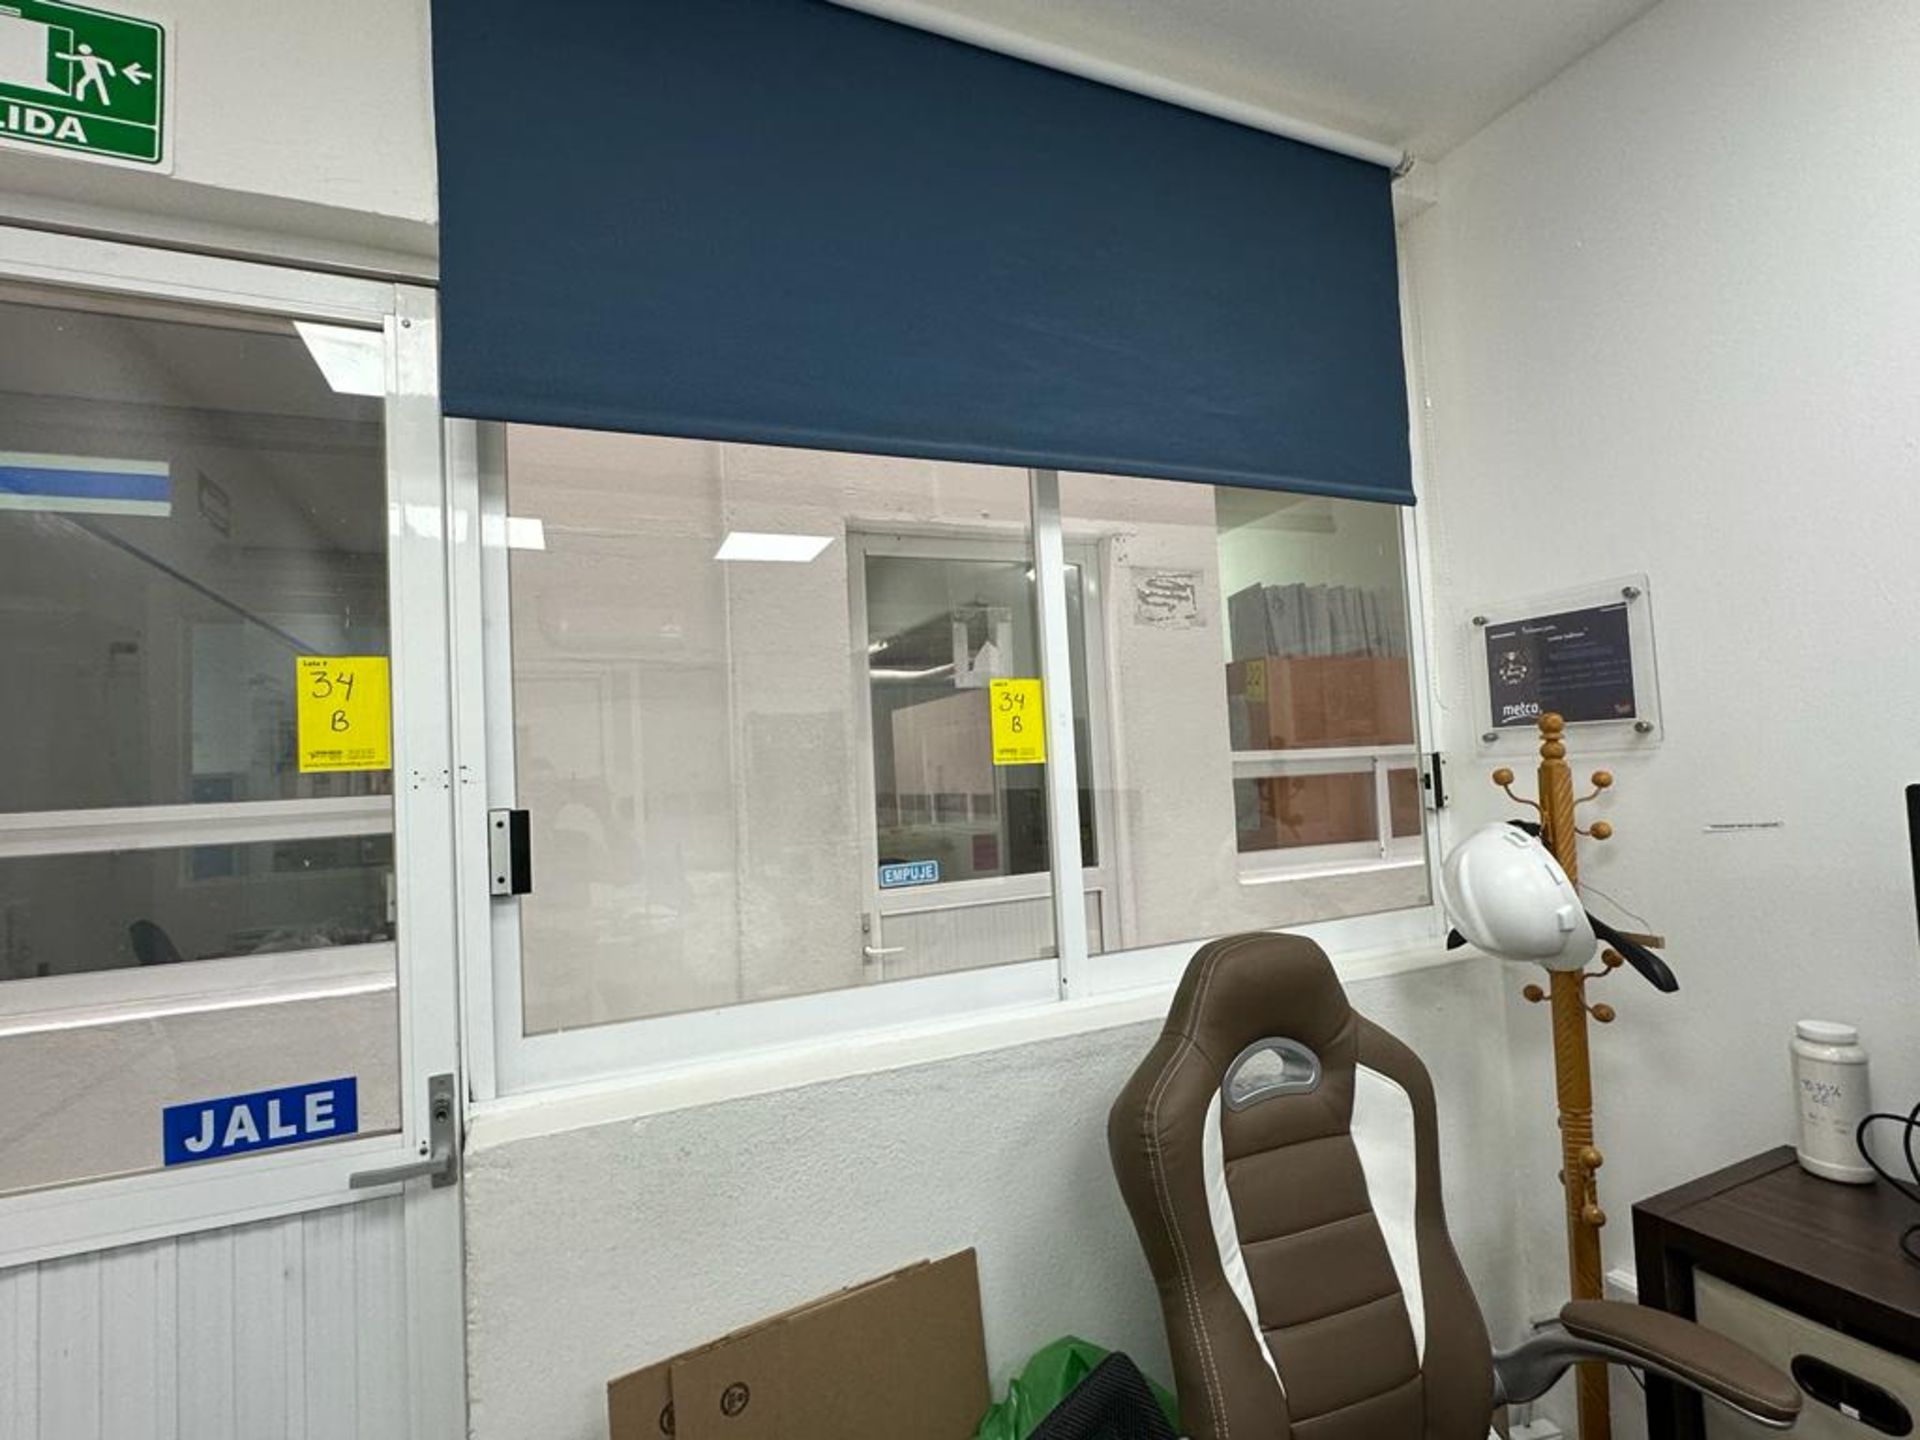 Lot consists of: 1 aluminum window with glass measures approximately 11.98 x 1.49 m; 1 aluminum - Image 7 of 26